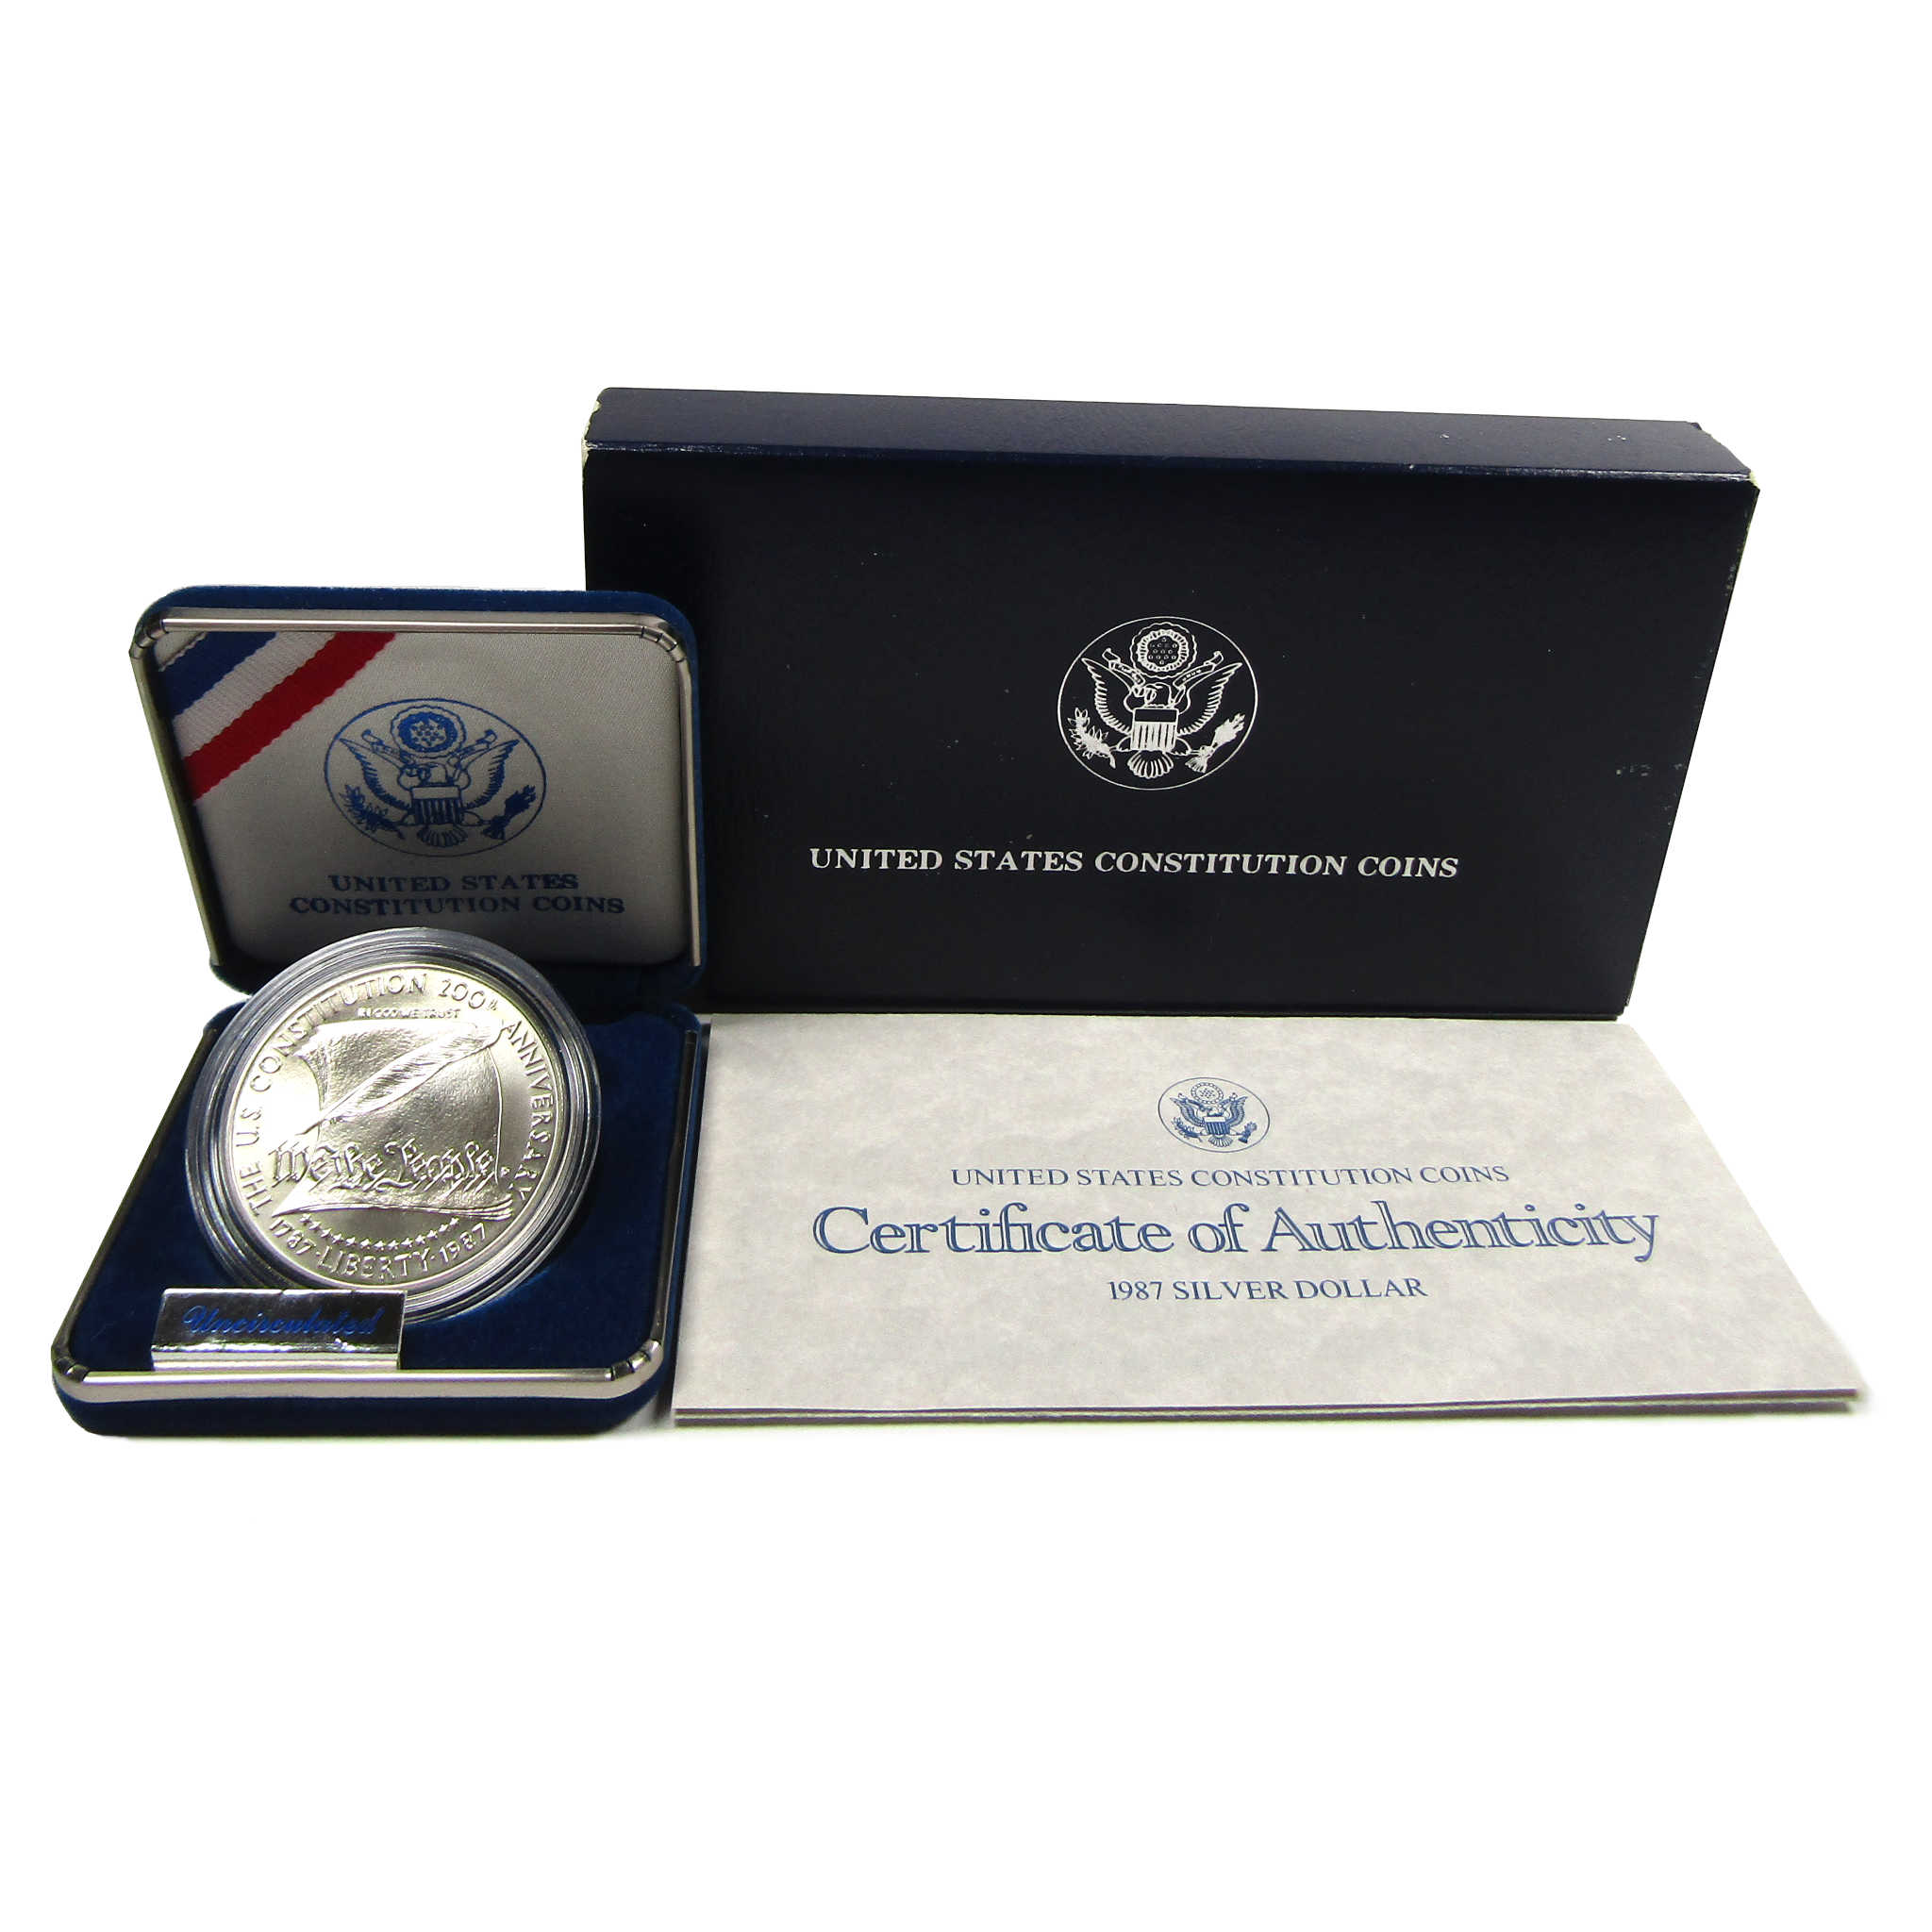 UNITED STATES CONSTITUTION COINS - アンティーク/コレクション